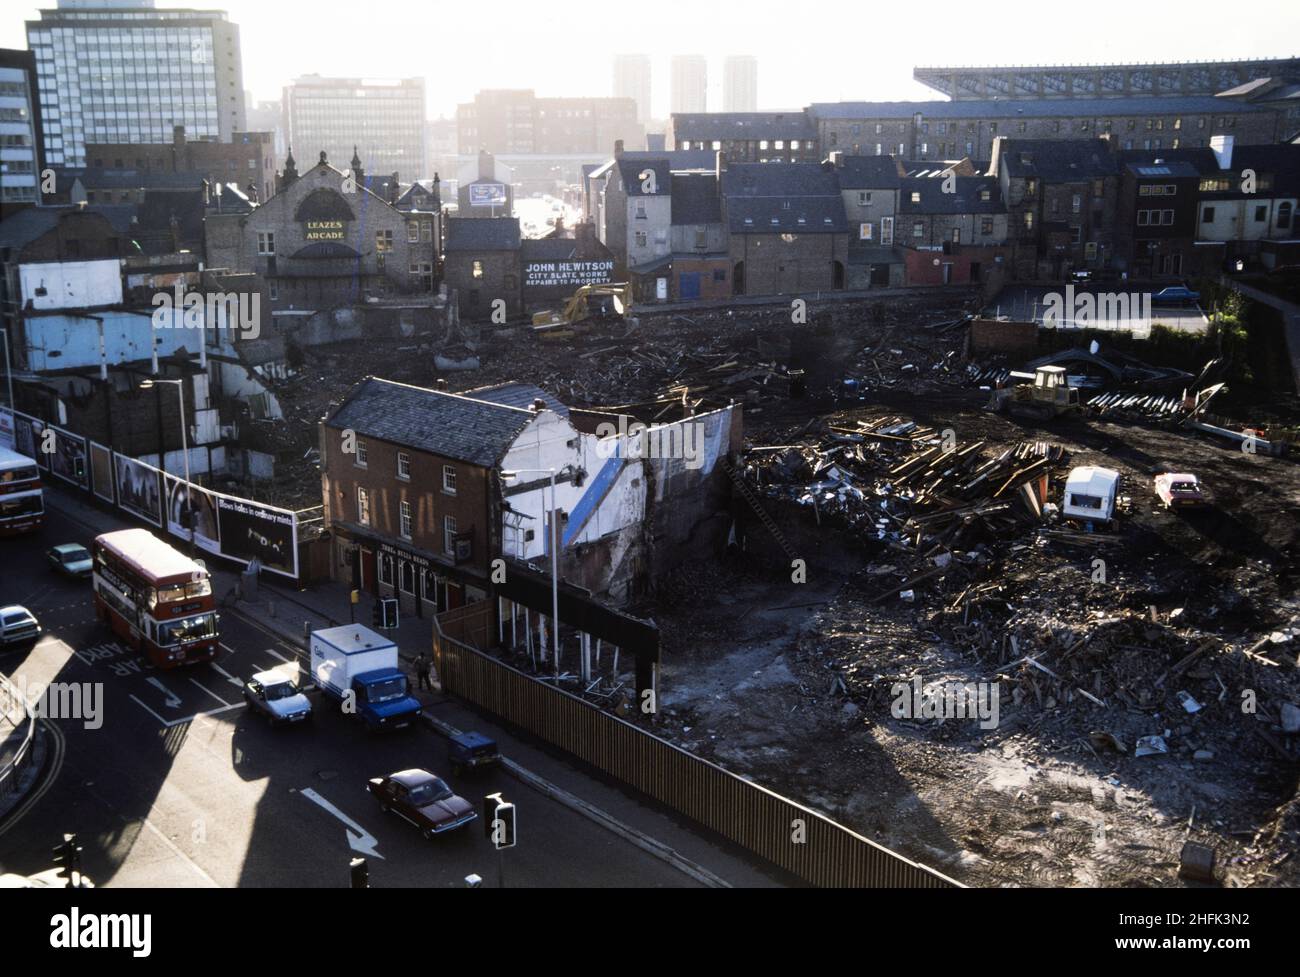 Percy Street, Newcastle upon Tyne, 1987-1988. A view over a demolition site on Percy Street showing the Three Bulls Head pub still standing in the centre. The demolition site was destined to become the land on which Eldon Garden shopping centre was built. The pub was incorporated into the shopping centre and car park development. Stock Photo